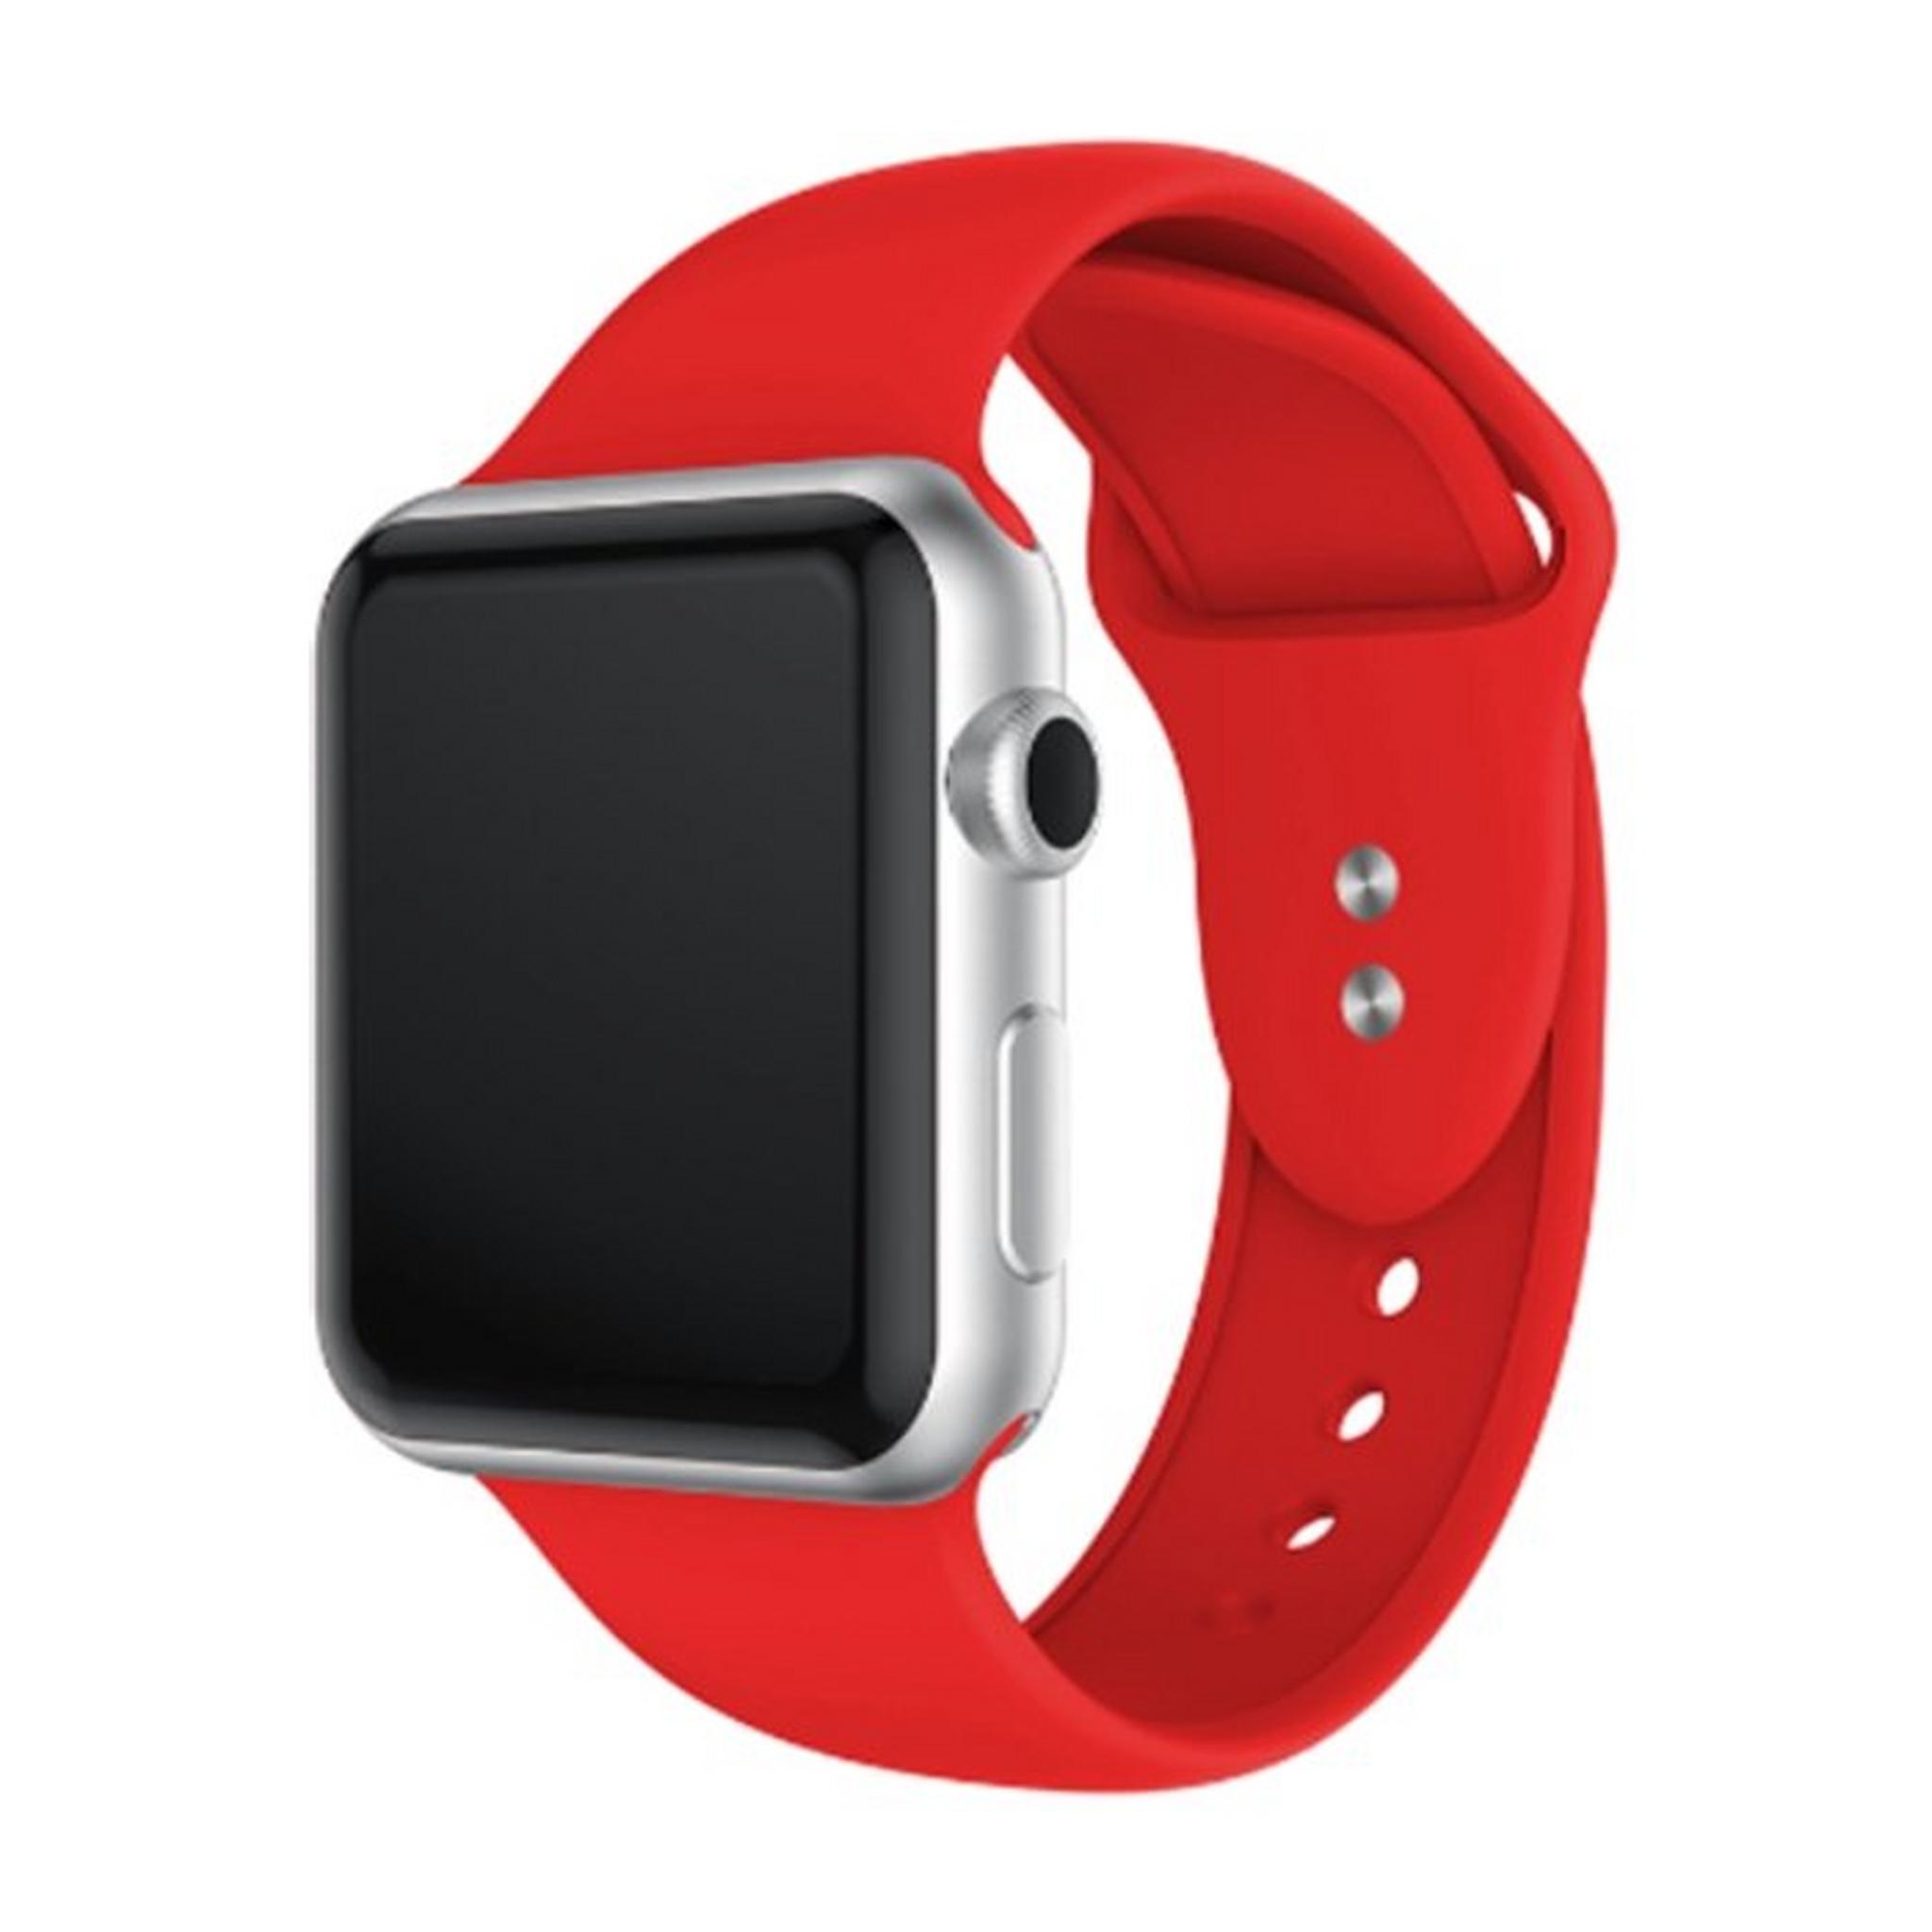 EQ Apple Watch Band Size 42/44MM - Red